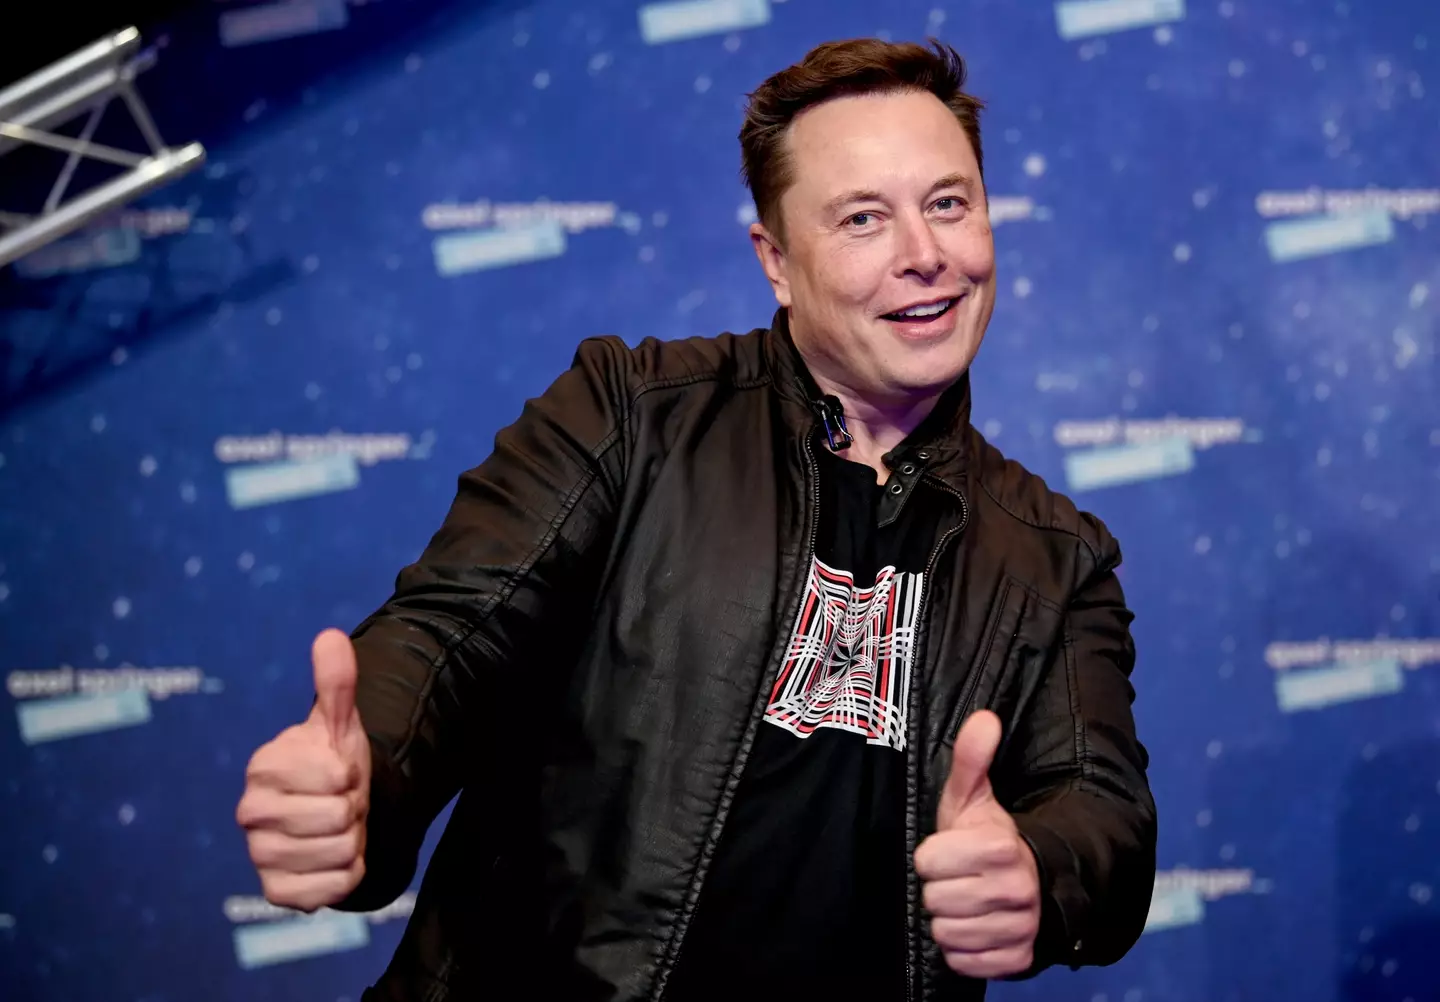 As the news spread of the Musk biopic the jokes were not far behind.